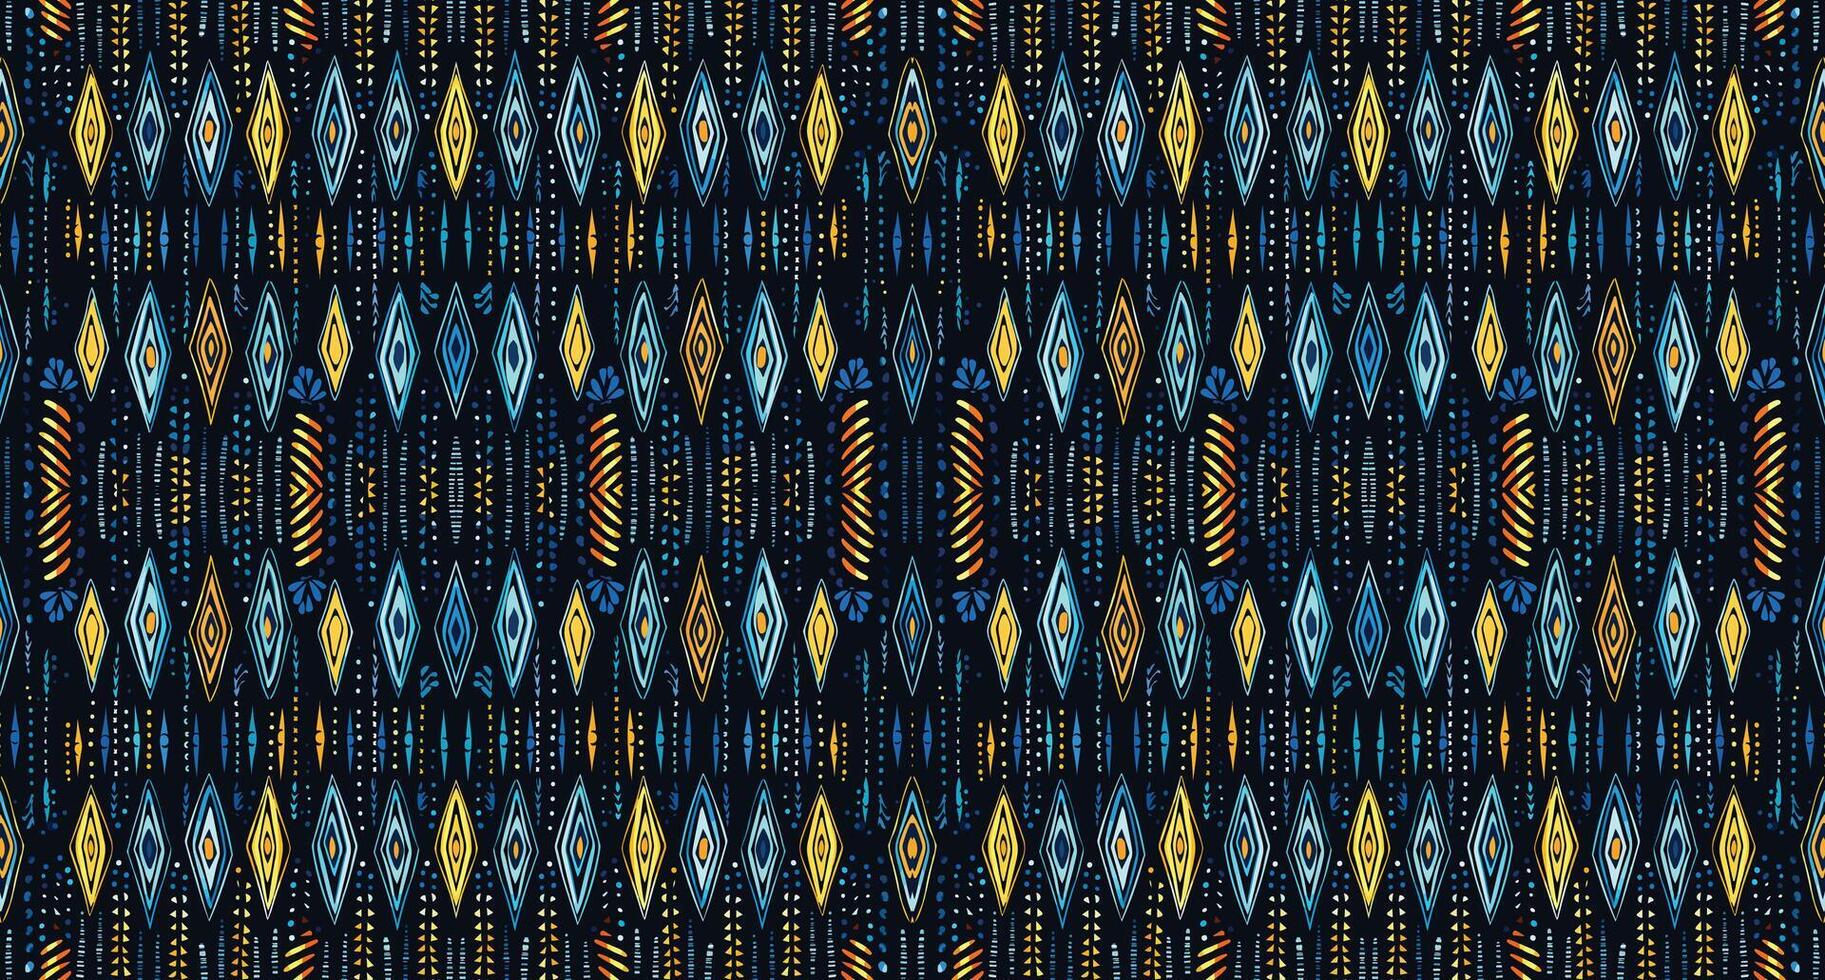 Abstract seamless pattern, seamless wallpaper, seamless background designed for use for interior, wallpaper, fabric, curtain, carpet, clothing, Batik, satin, background, illustration vector